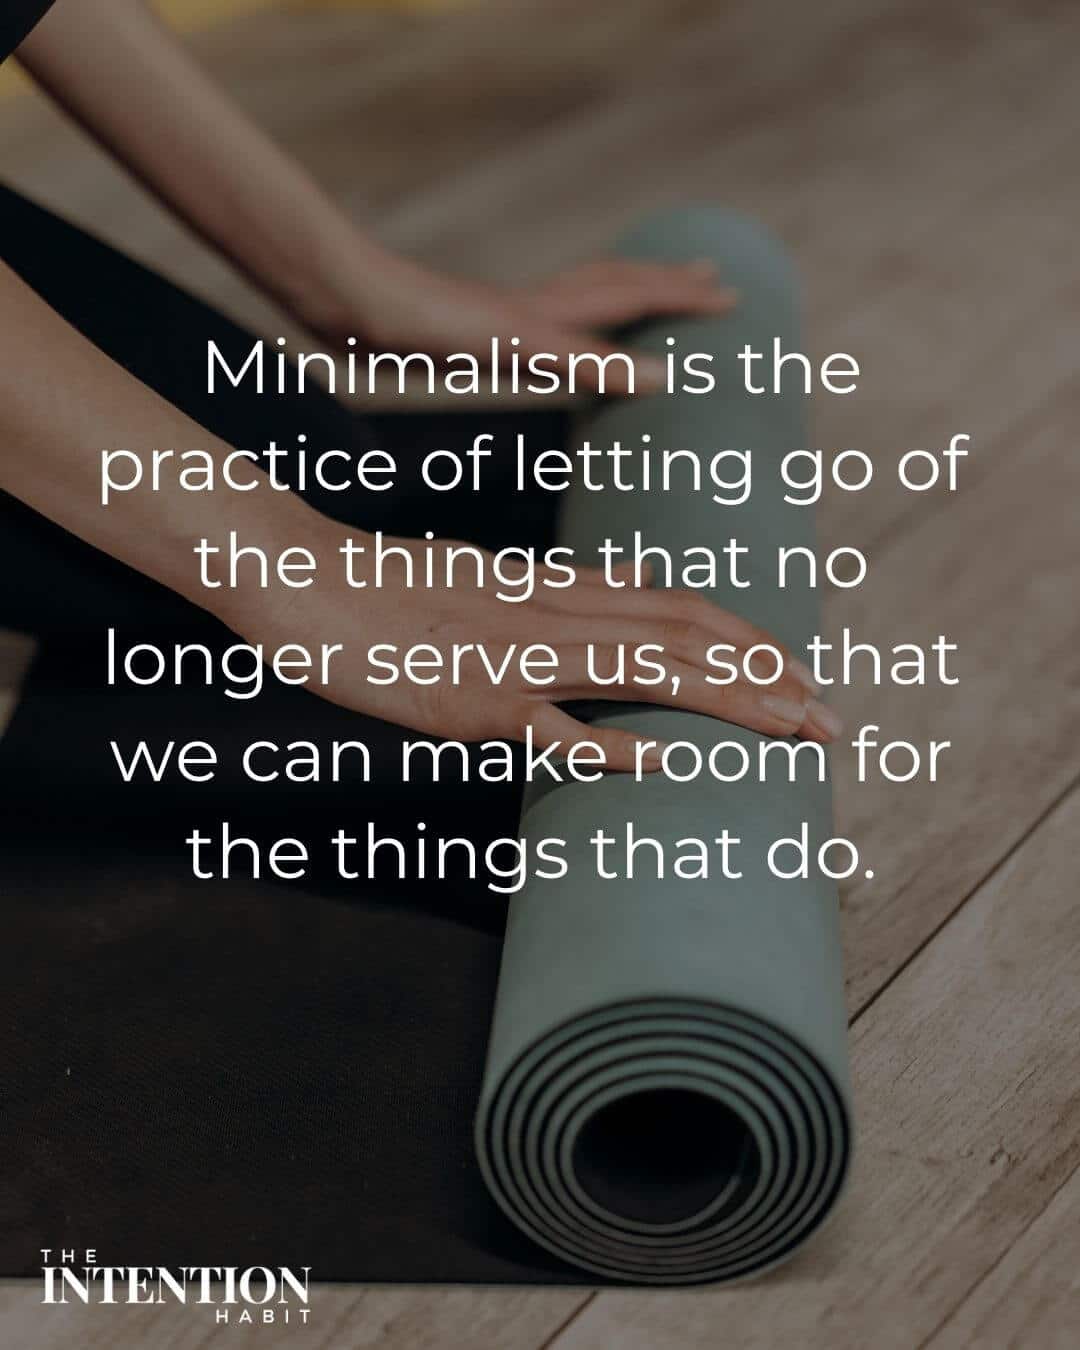 minimalism is the practice of letting go of the things that no longer serve us, so that we can make room for the things that do